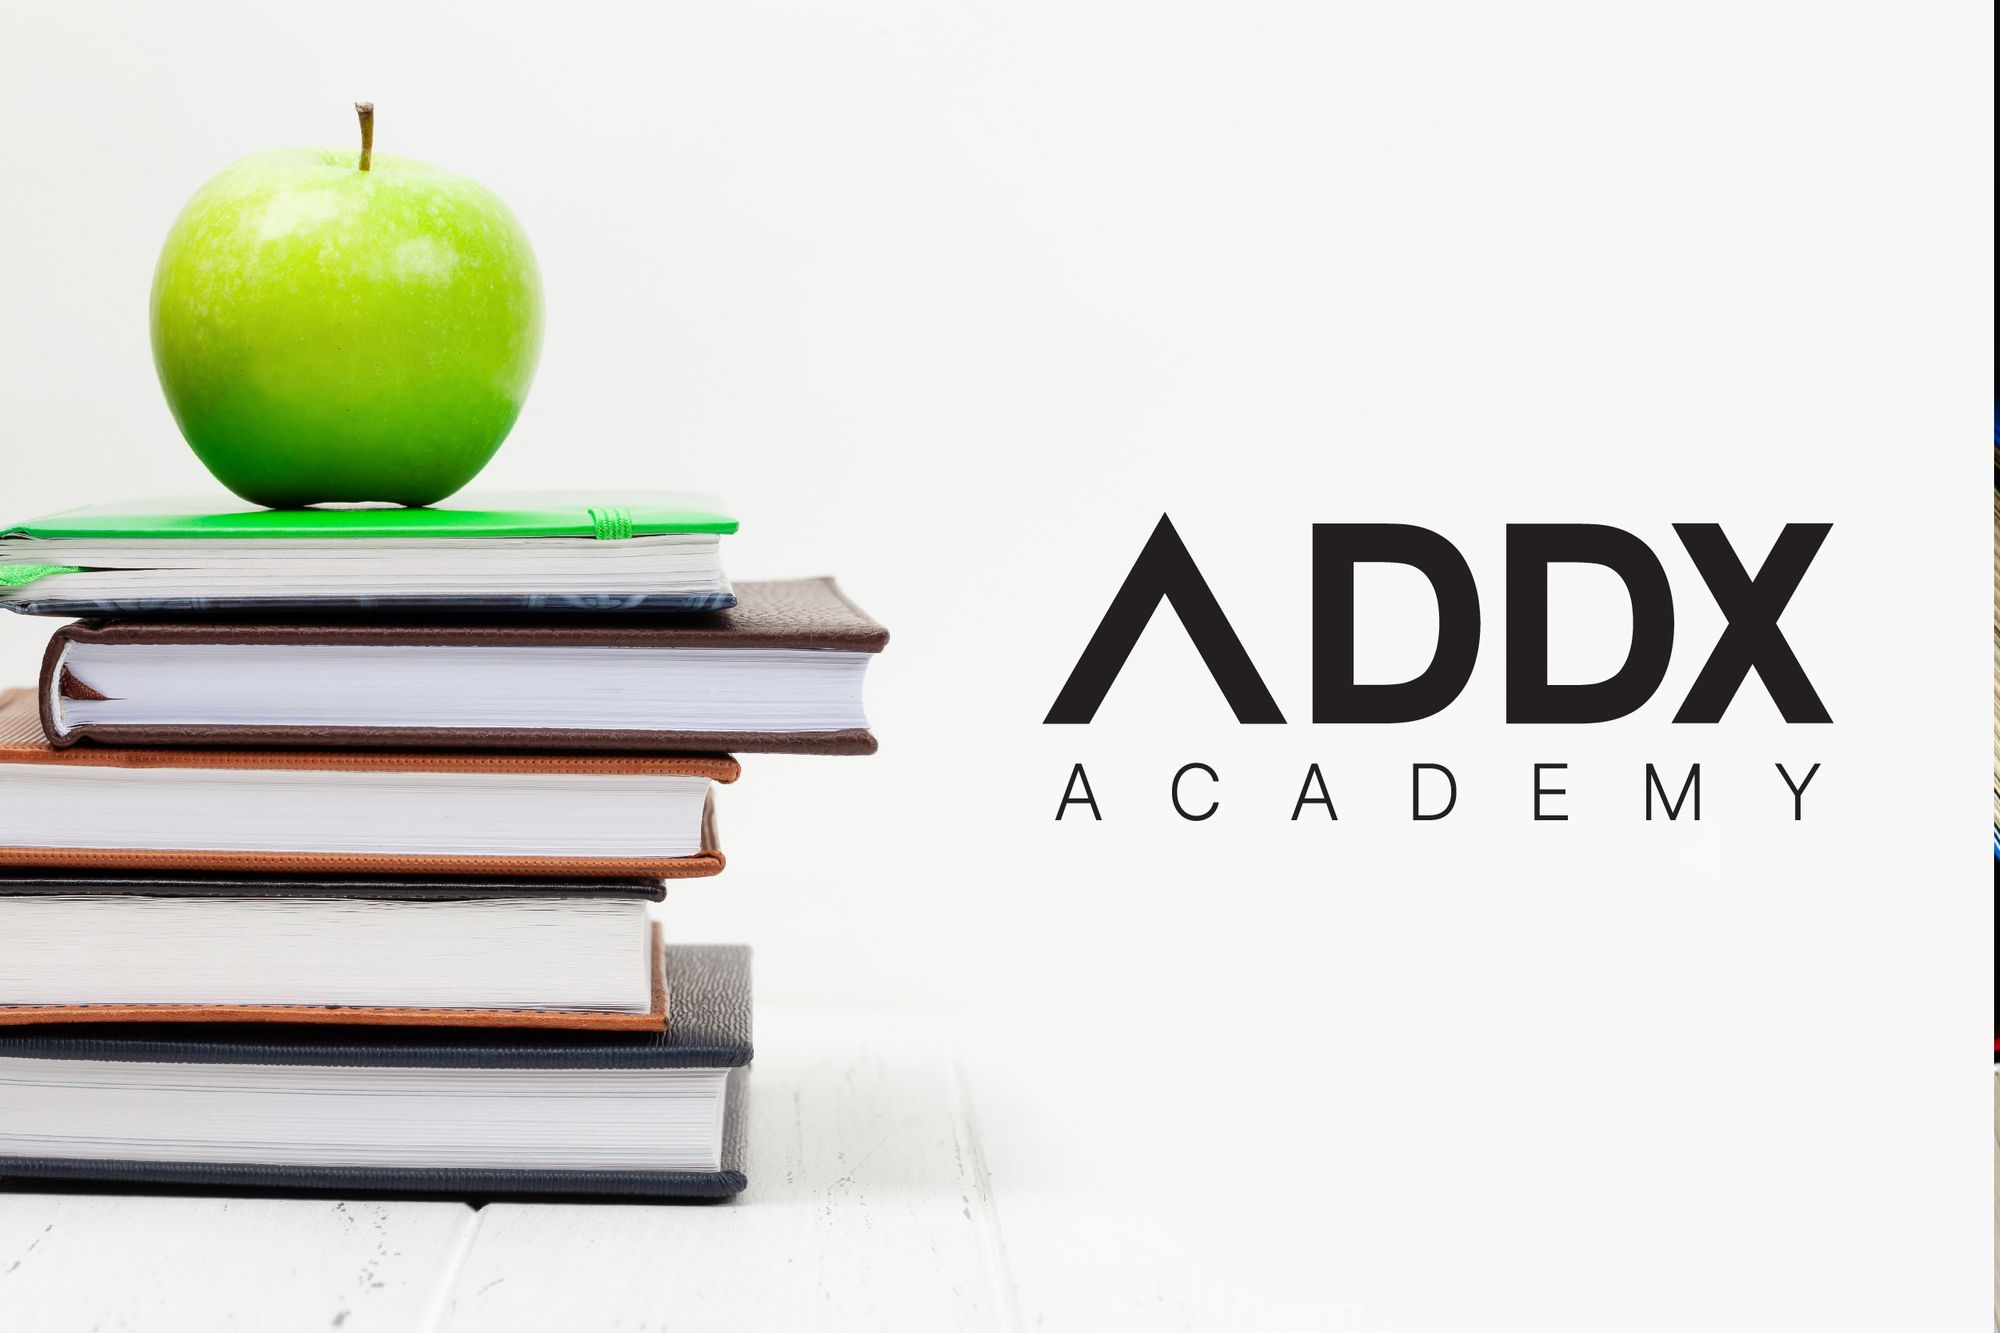 ADDX Academy: What Are Private Equity Funds?